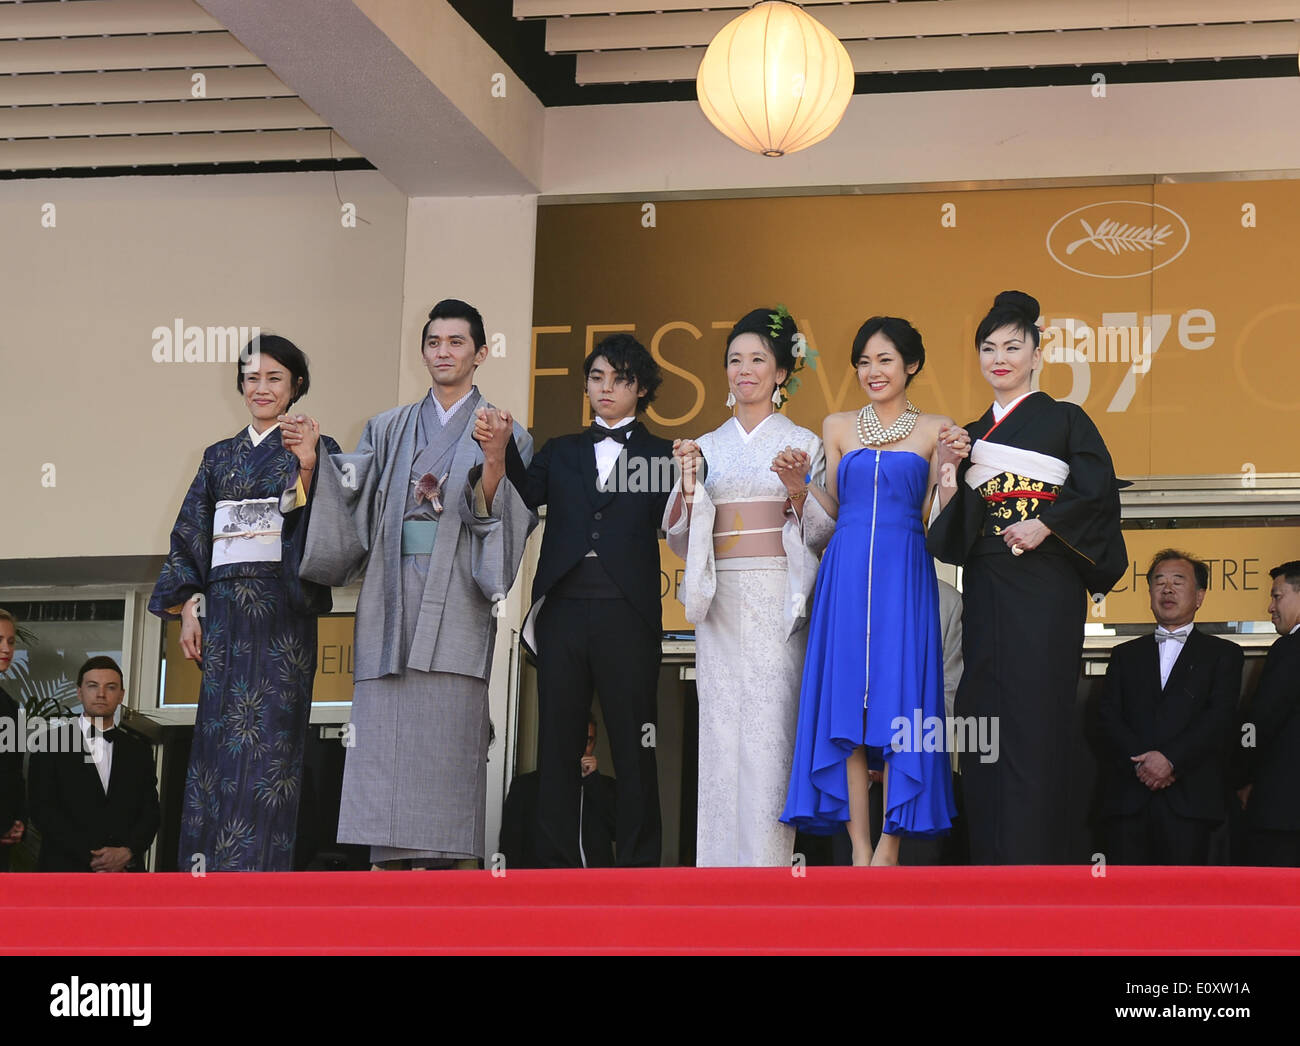 Cannes. 20th May, 2014. Japanese actress Makiko Watanabe, Japanese actor Jun Murakami, Japanese actor Nijiro Murakami, Japanese director Naomi Kawase, Japanese actress Jun Yoshinaga and Japanese actress Miyuki Matsuda (from L to R) arrive for the screening of 'Futatsume No Mado' (Still The Water) during the 67th annual Cannes Film Festival, in Cannes, France, 20 May 2014. The movie is presented in the Official Competition of the festival which runs from 14 to 25 May. Credit:  Ye Pingfan/Xinhua/Alamy Live News Stock Photo